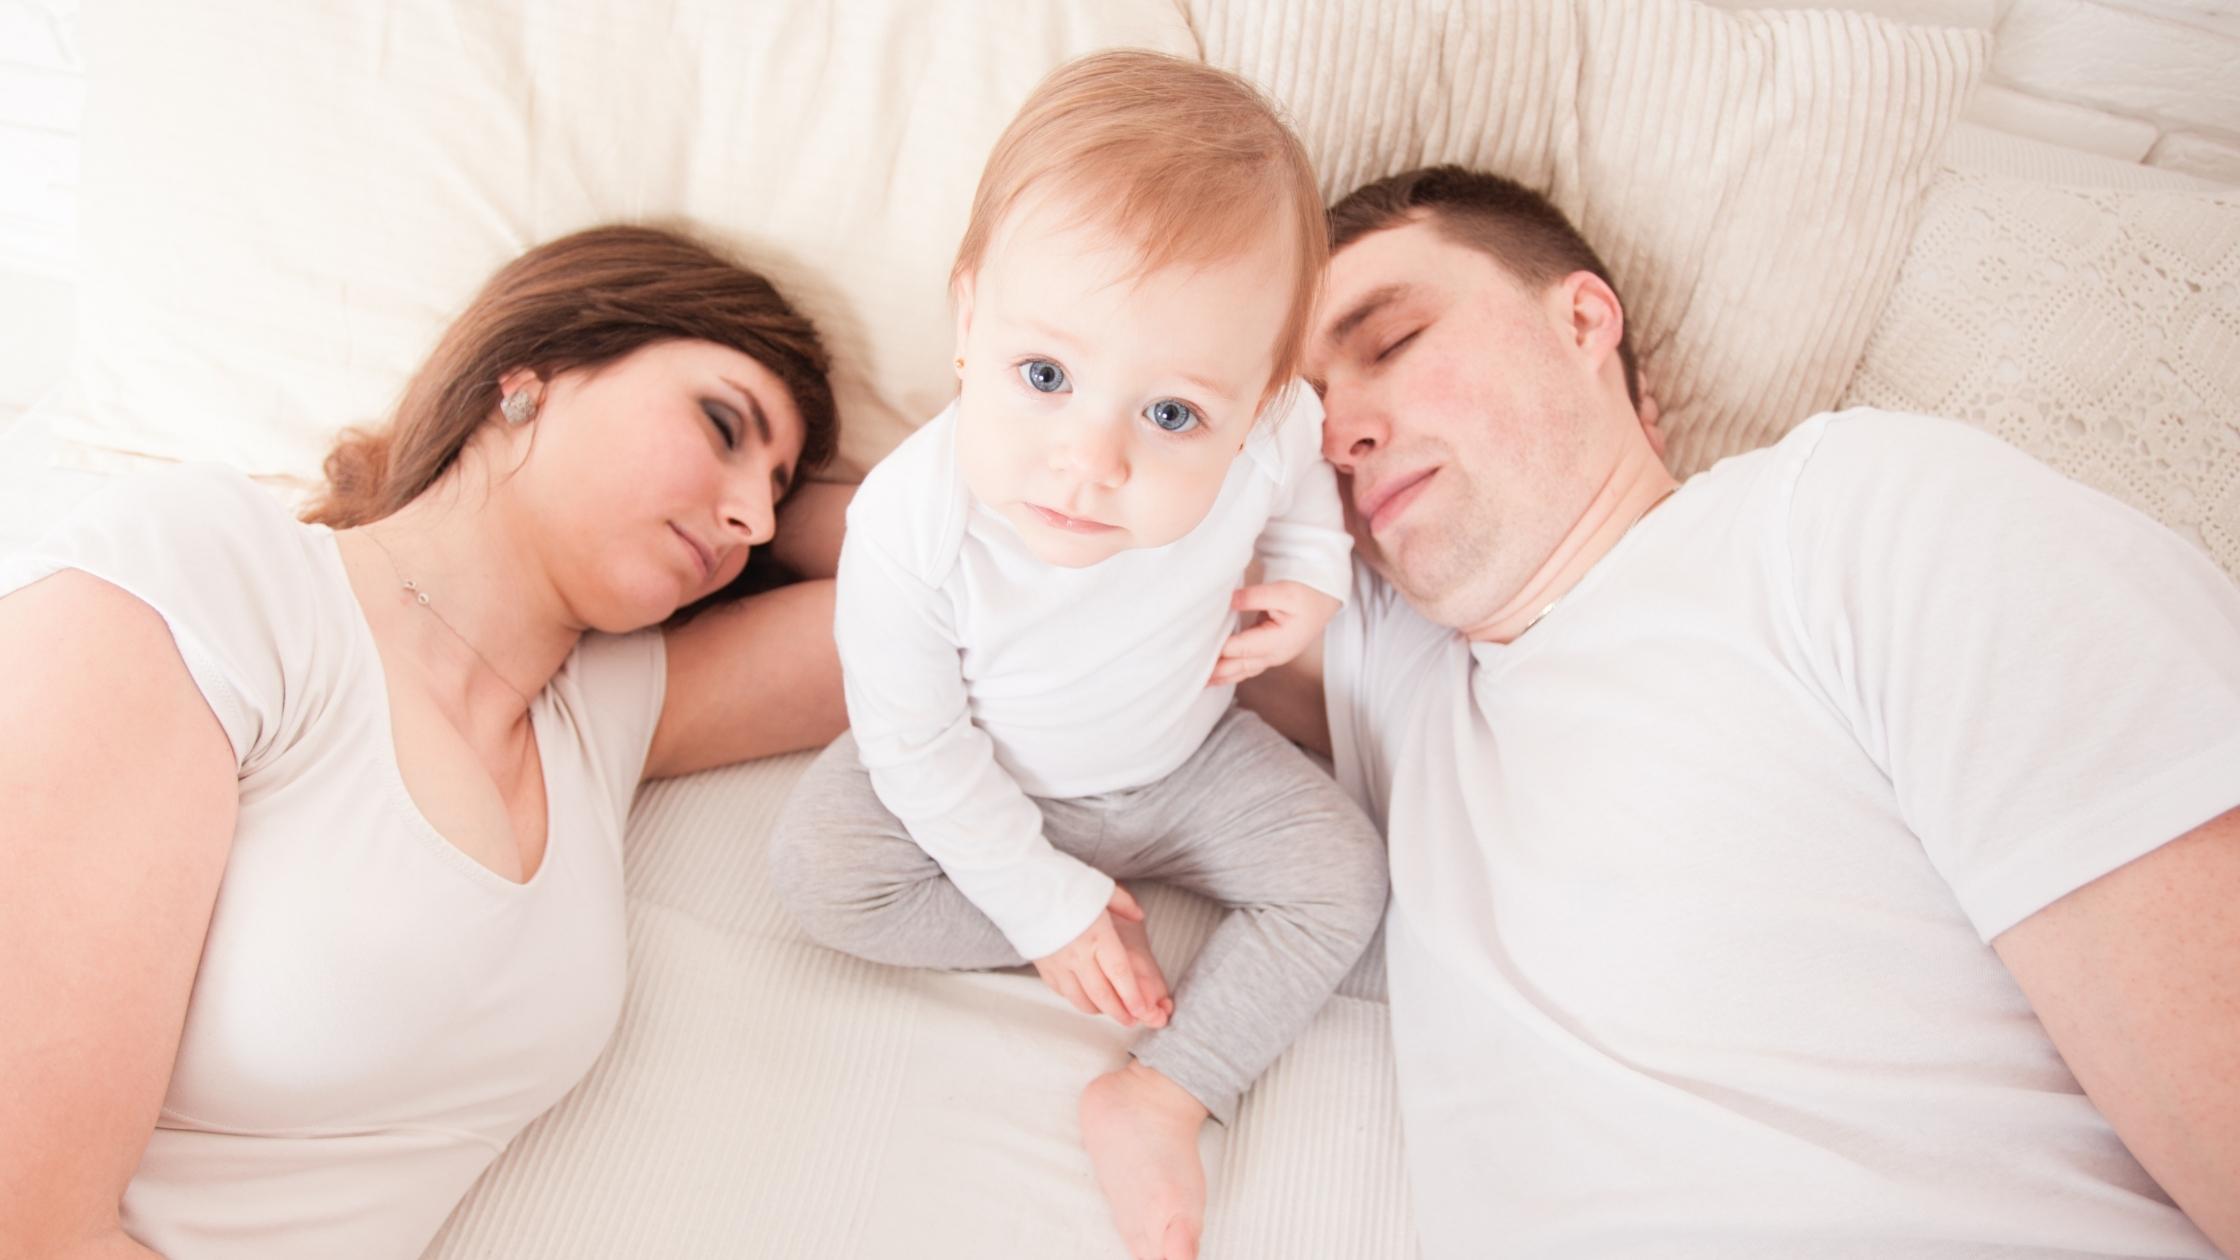 When Is a Child Too Old to Sleep With Parents